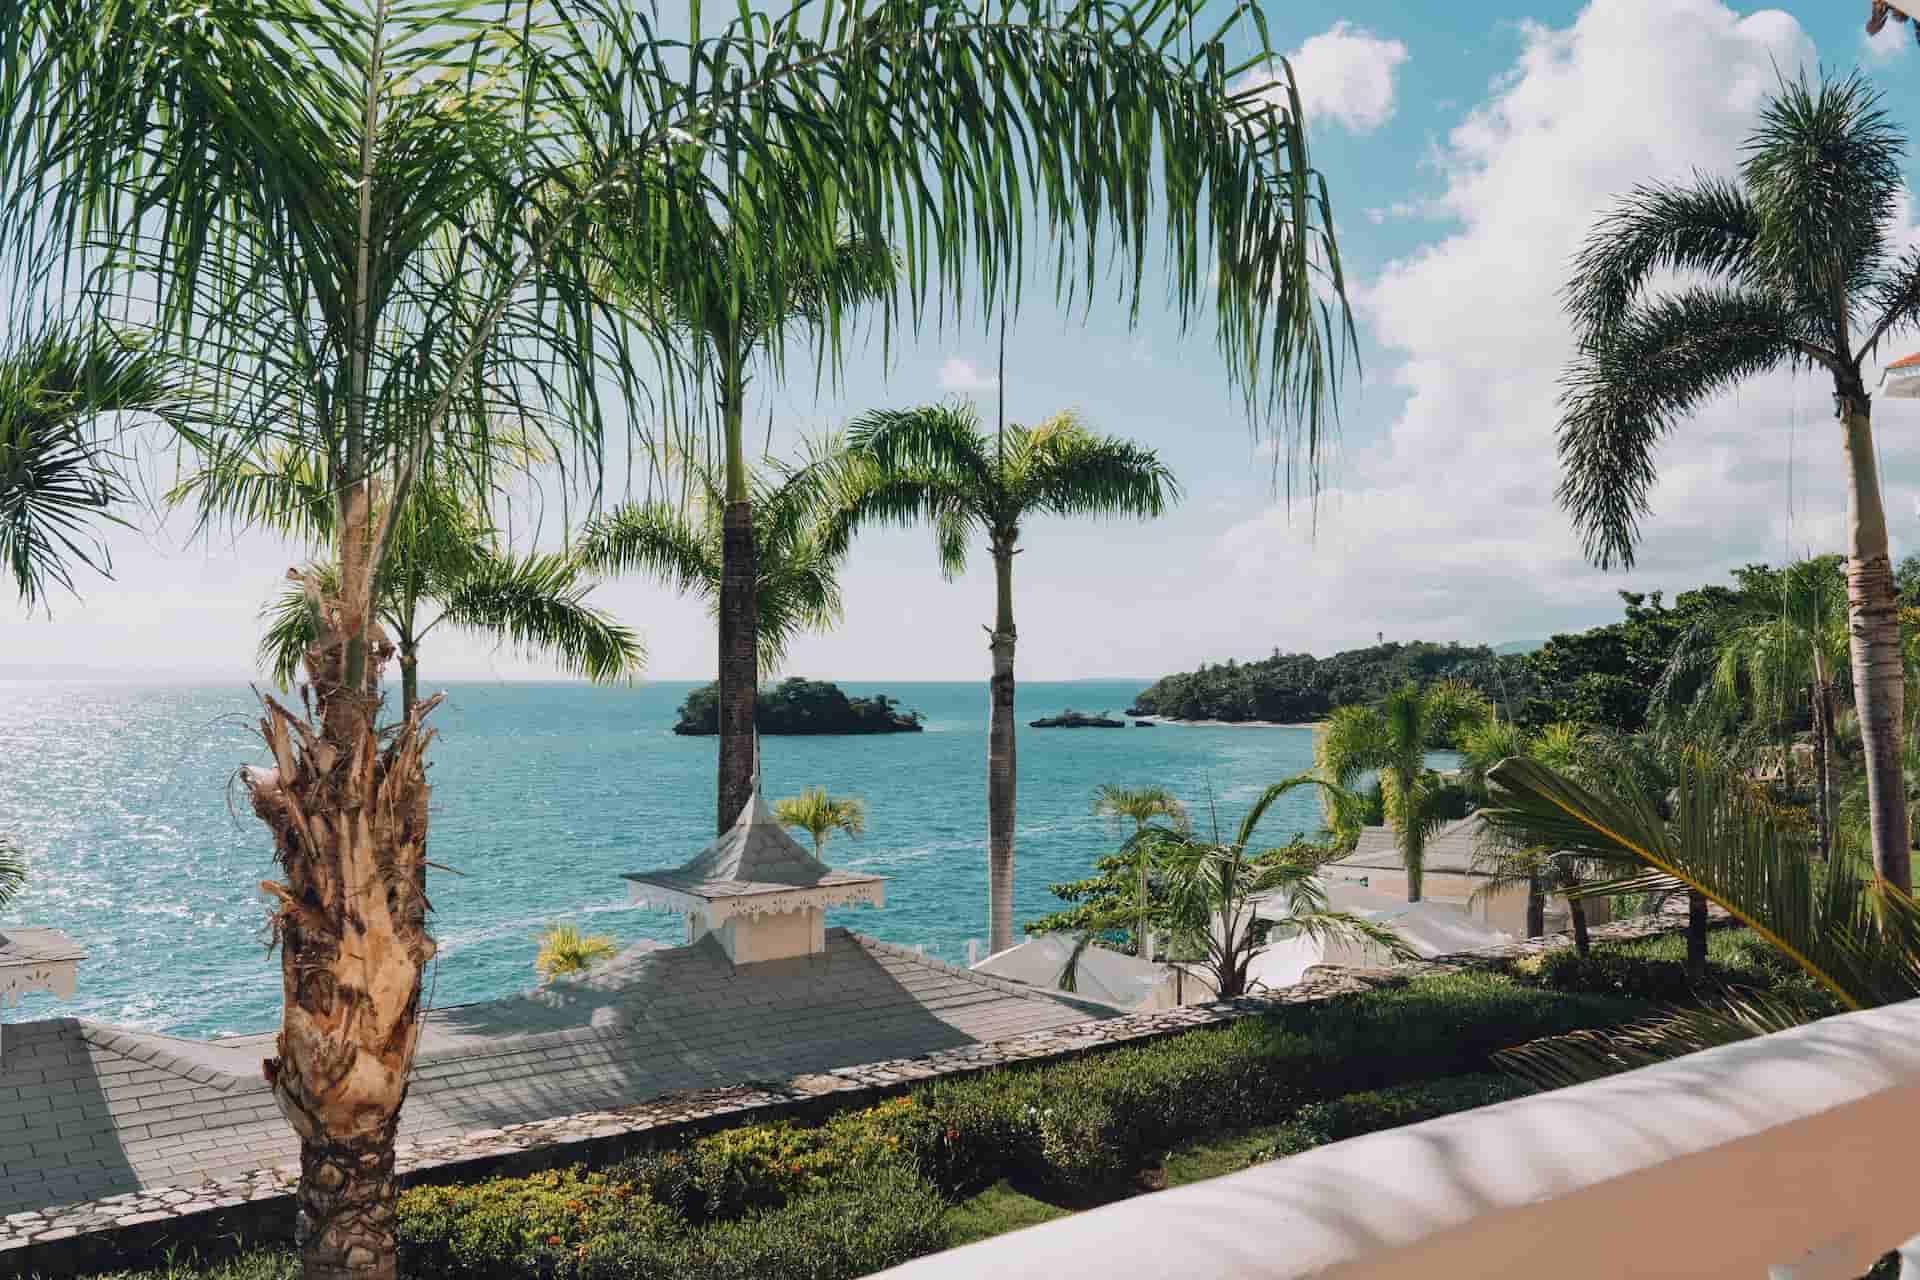 Tropical climate, clear waters and cabanas in Samana, Dominical Republic